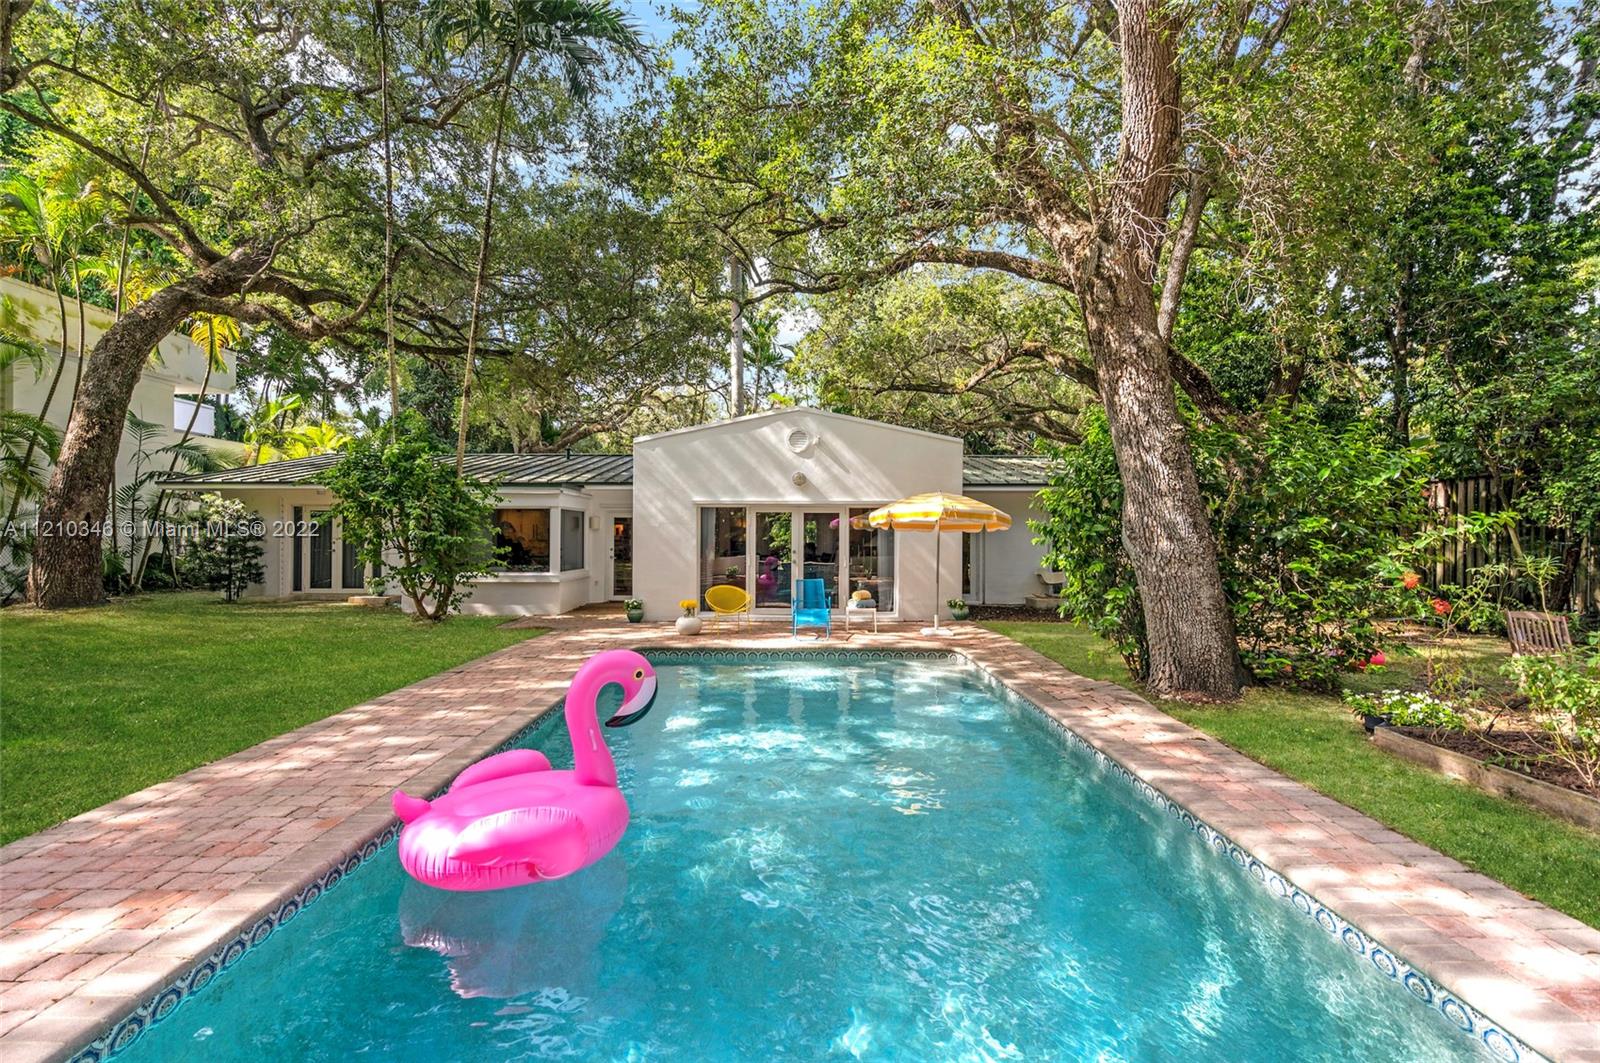 Coveted mid-century 4 bed / 3.5 bath pool home on a magnificent 19,700 sq ft lot in the heart of Coconut Grove. Enjoy serenity & privacy among majestic oaks, fruit trees, and the sounds of native birds, just minutes from downtown Miami. Located on lushly green Poinciana Ave, this gated sub-tropical paradise retains the bohemian ambience that’s attracted artists, musicians and writers to The Grove for decades. Occupied by current owners since 2004. Recently painted and refreshed. Galvalume metal roof. Two-car garage with Tesla charger installed. Under a mile to top schools, houses of worship and nature preserves. Marina, playgrounds, playing fields, farmers market, cafes and foodie-favorite restaurants are all within easy biking distance. Priced to sell & ready to show. Request our 3D Tour.